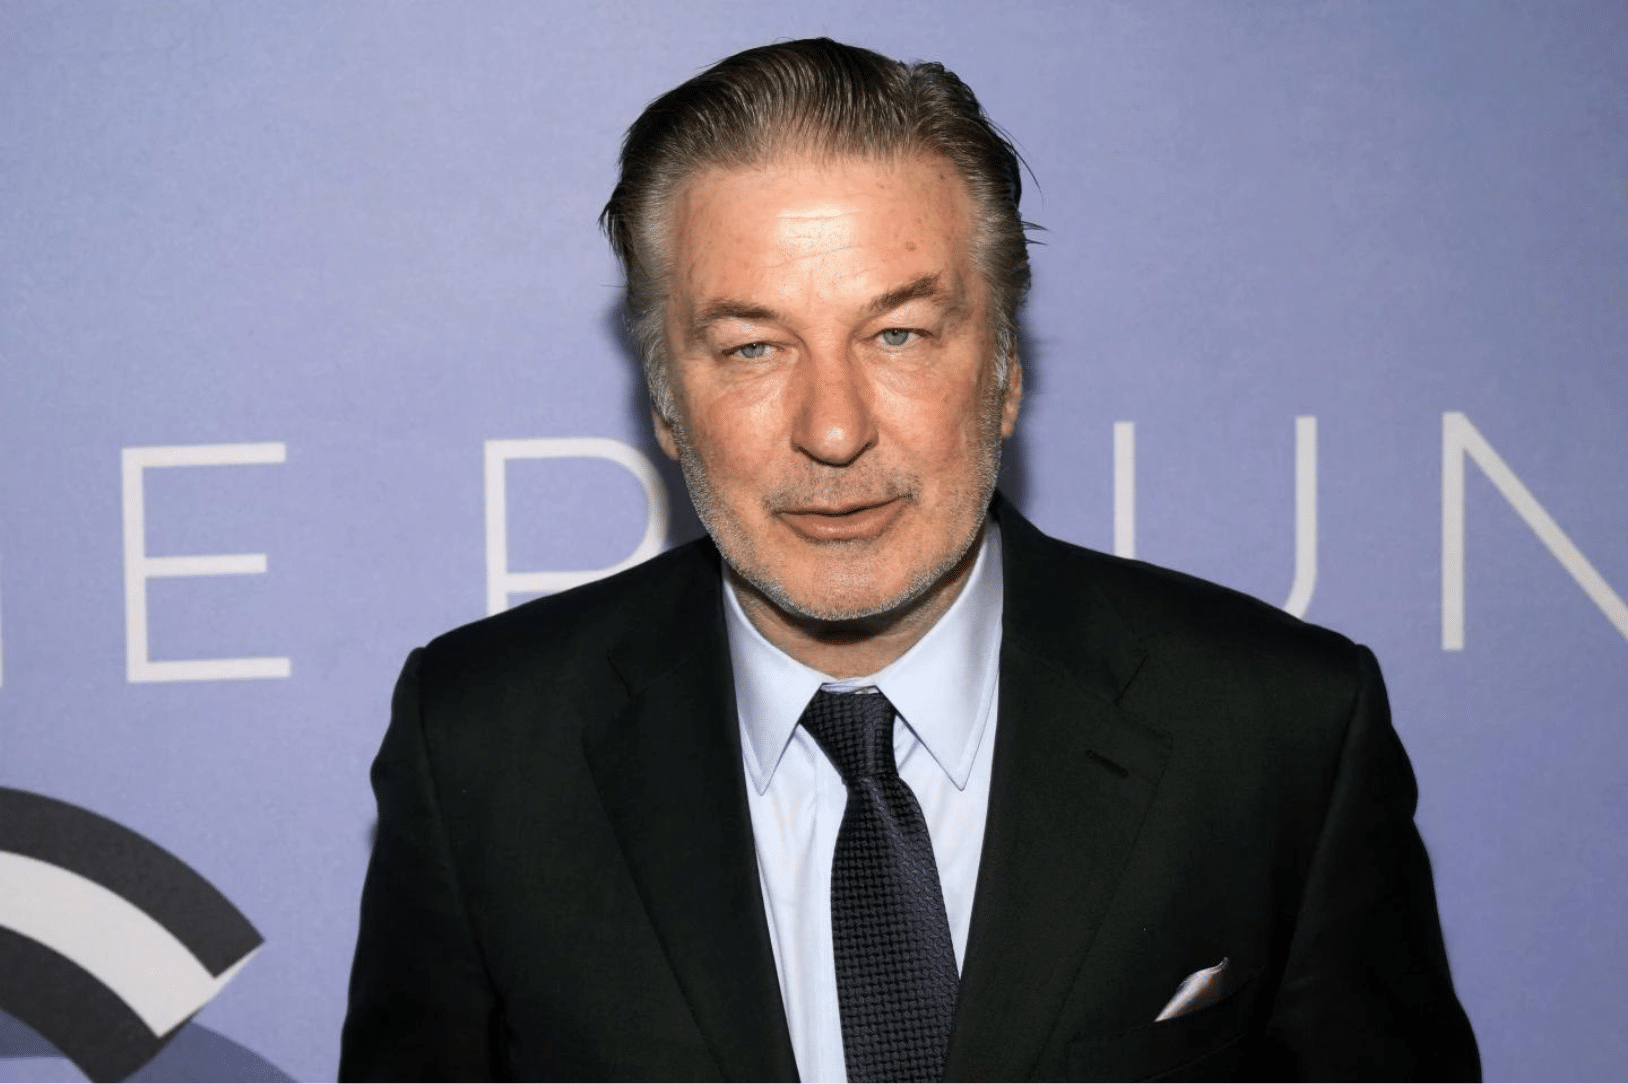 New Mexico denies film incentive on ‘Rust’ after fatal shooting by Alec Baldwin